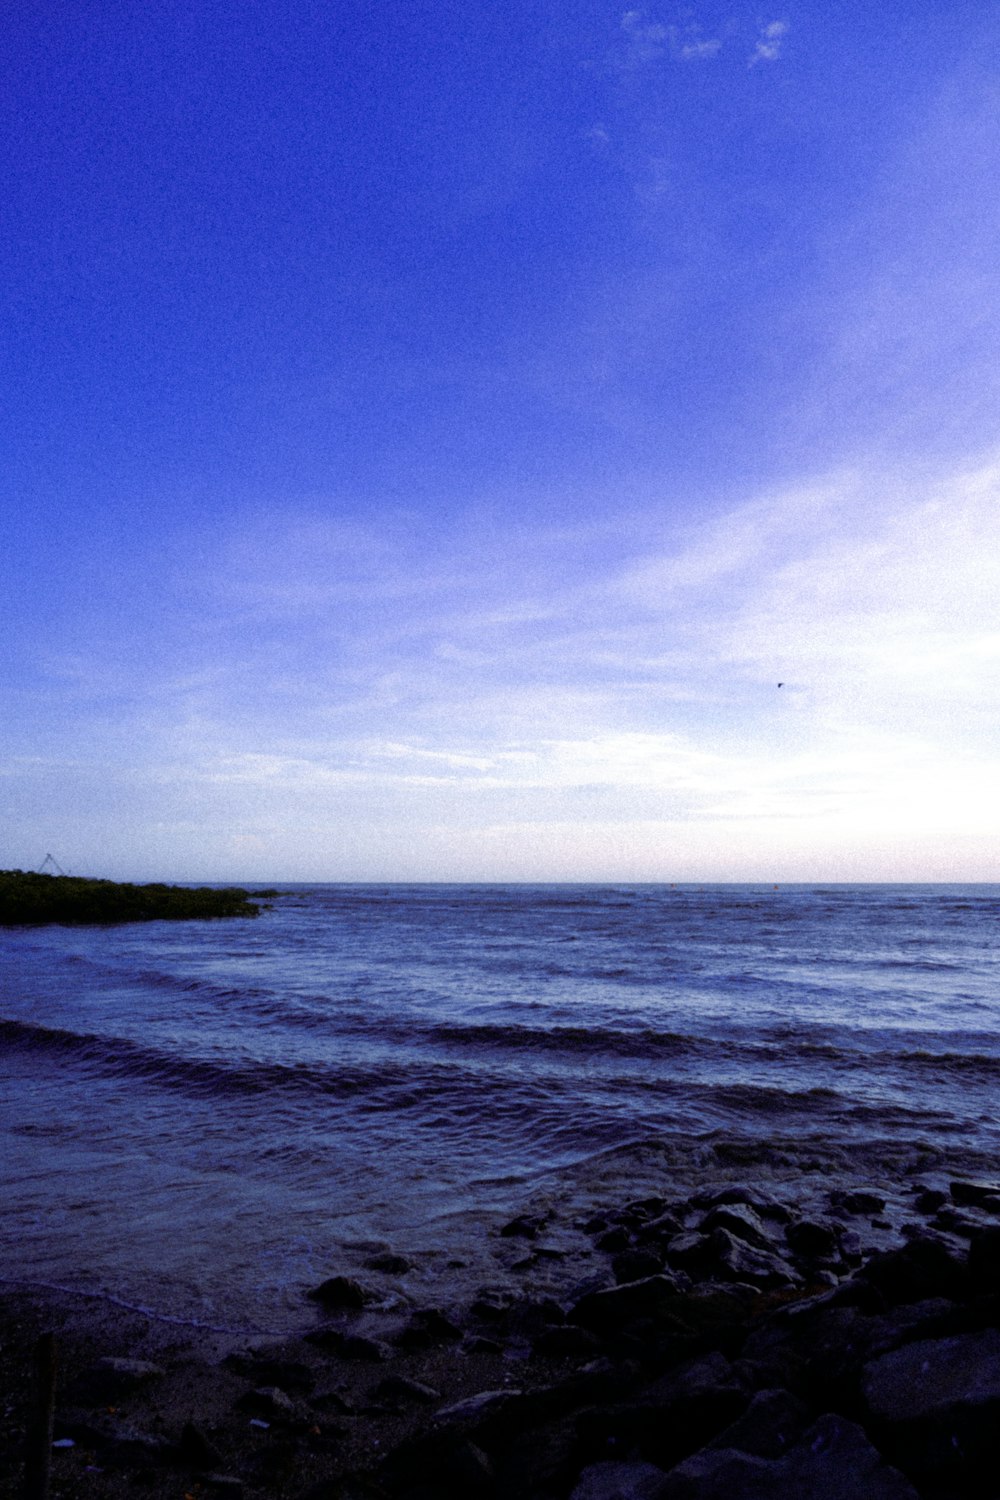 a view of a body of water from a rocky shore